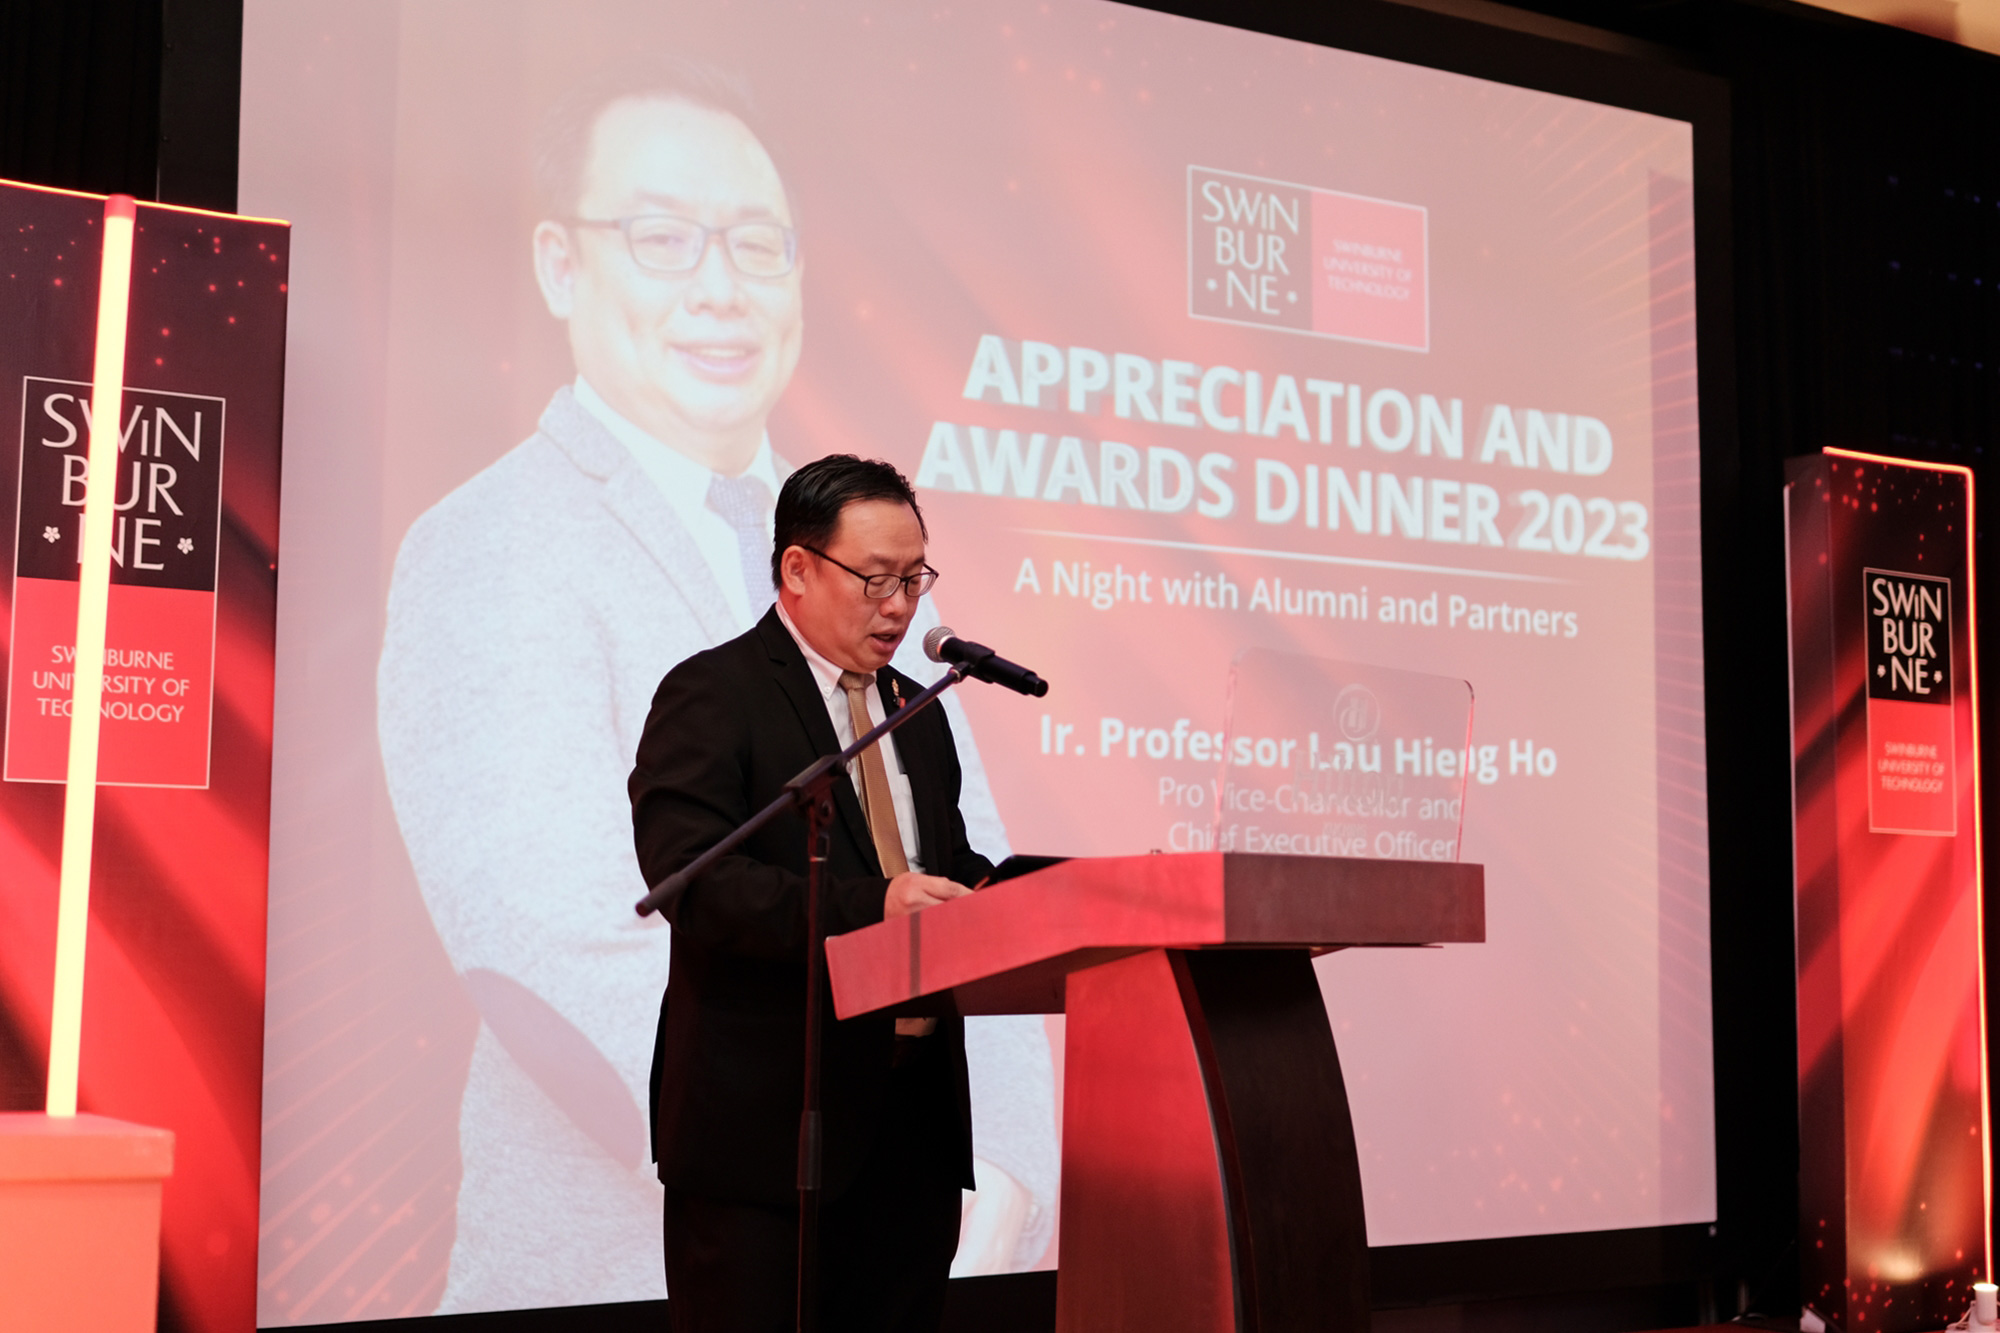 Ir Professor Lau Hieng Ho delivers the welcoming address at the Appreciation and Awards Dinner event.